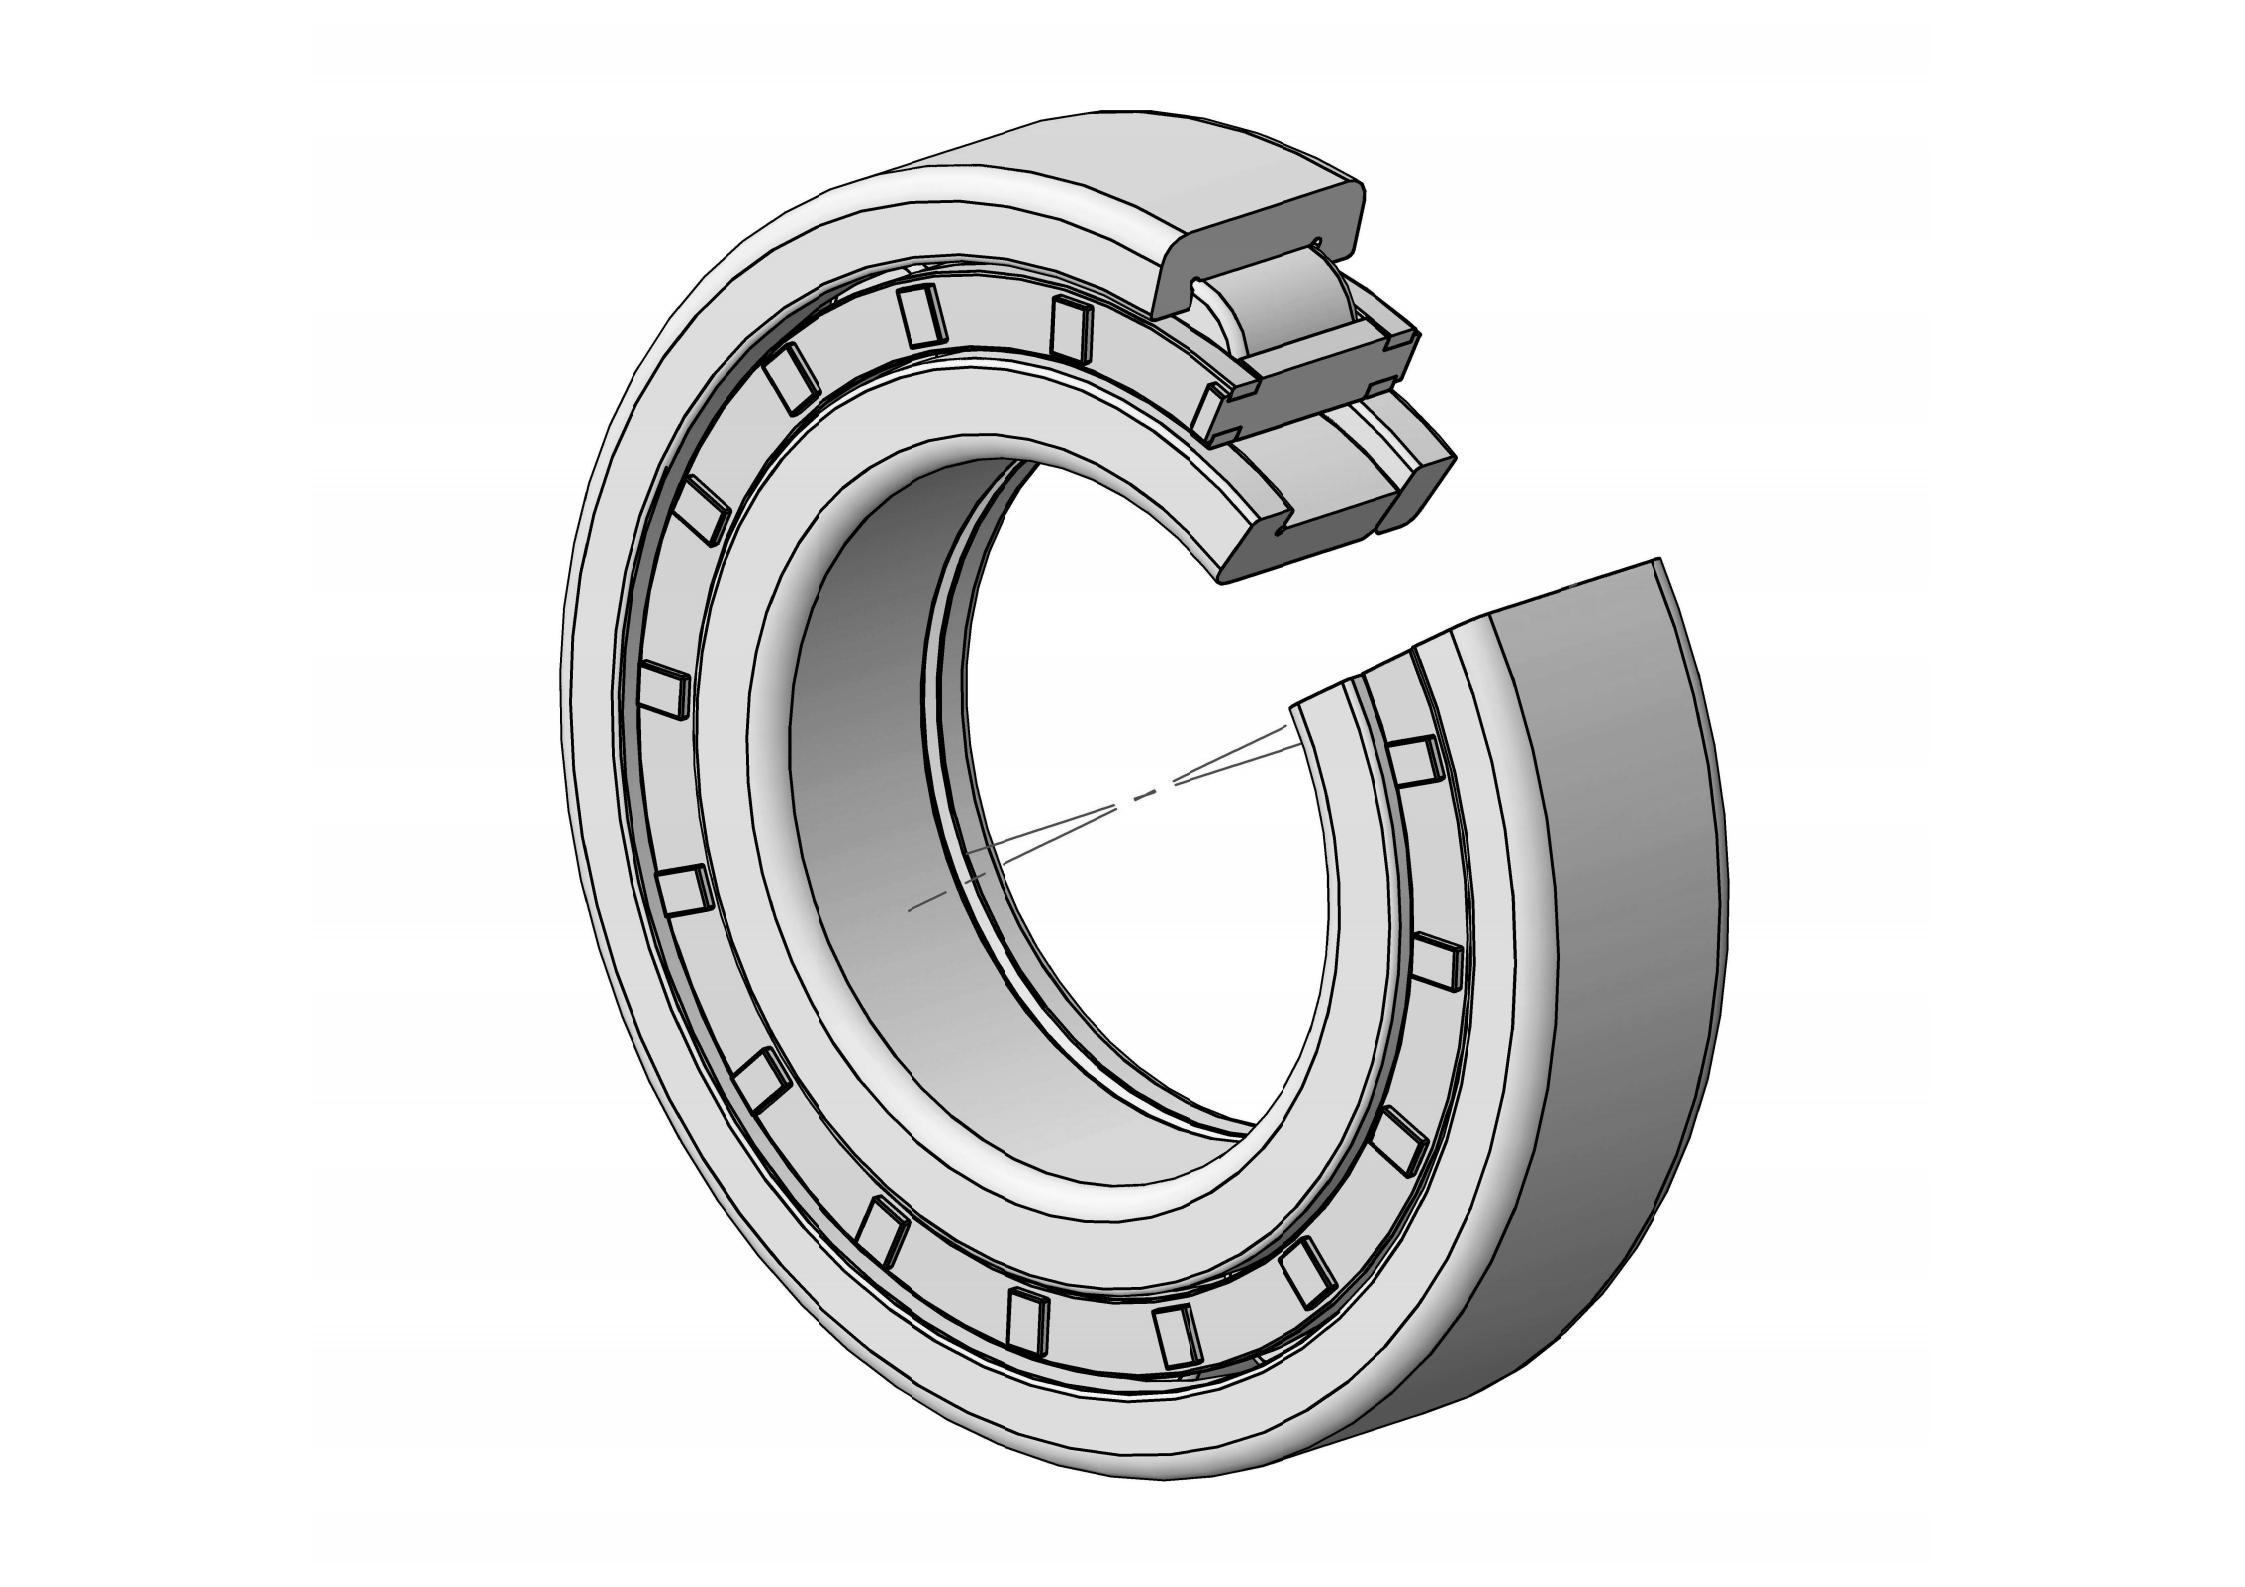 NUP2322-EM Single Row Cylindrical roller bearing 